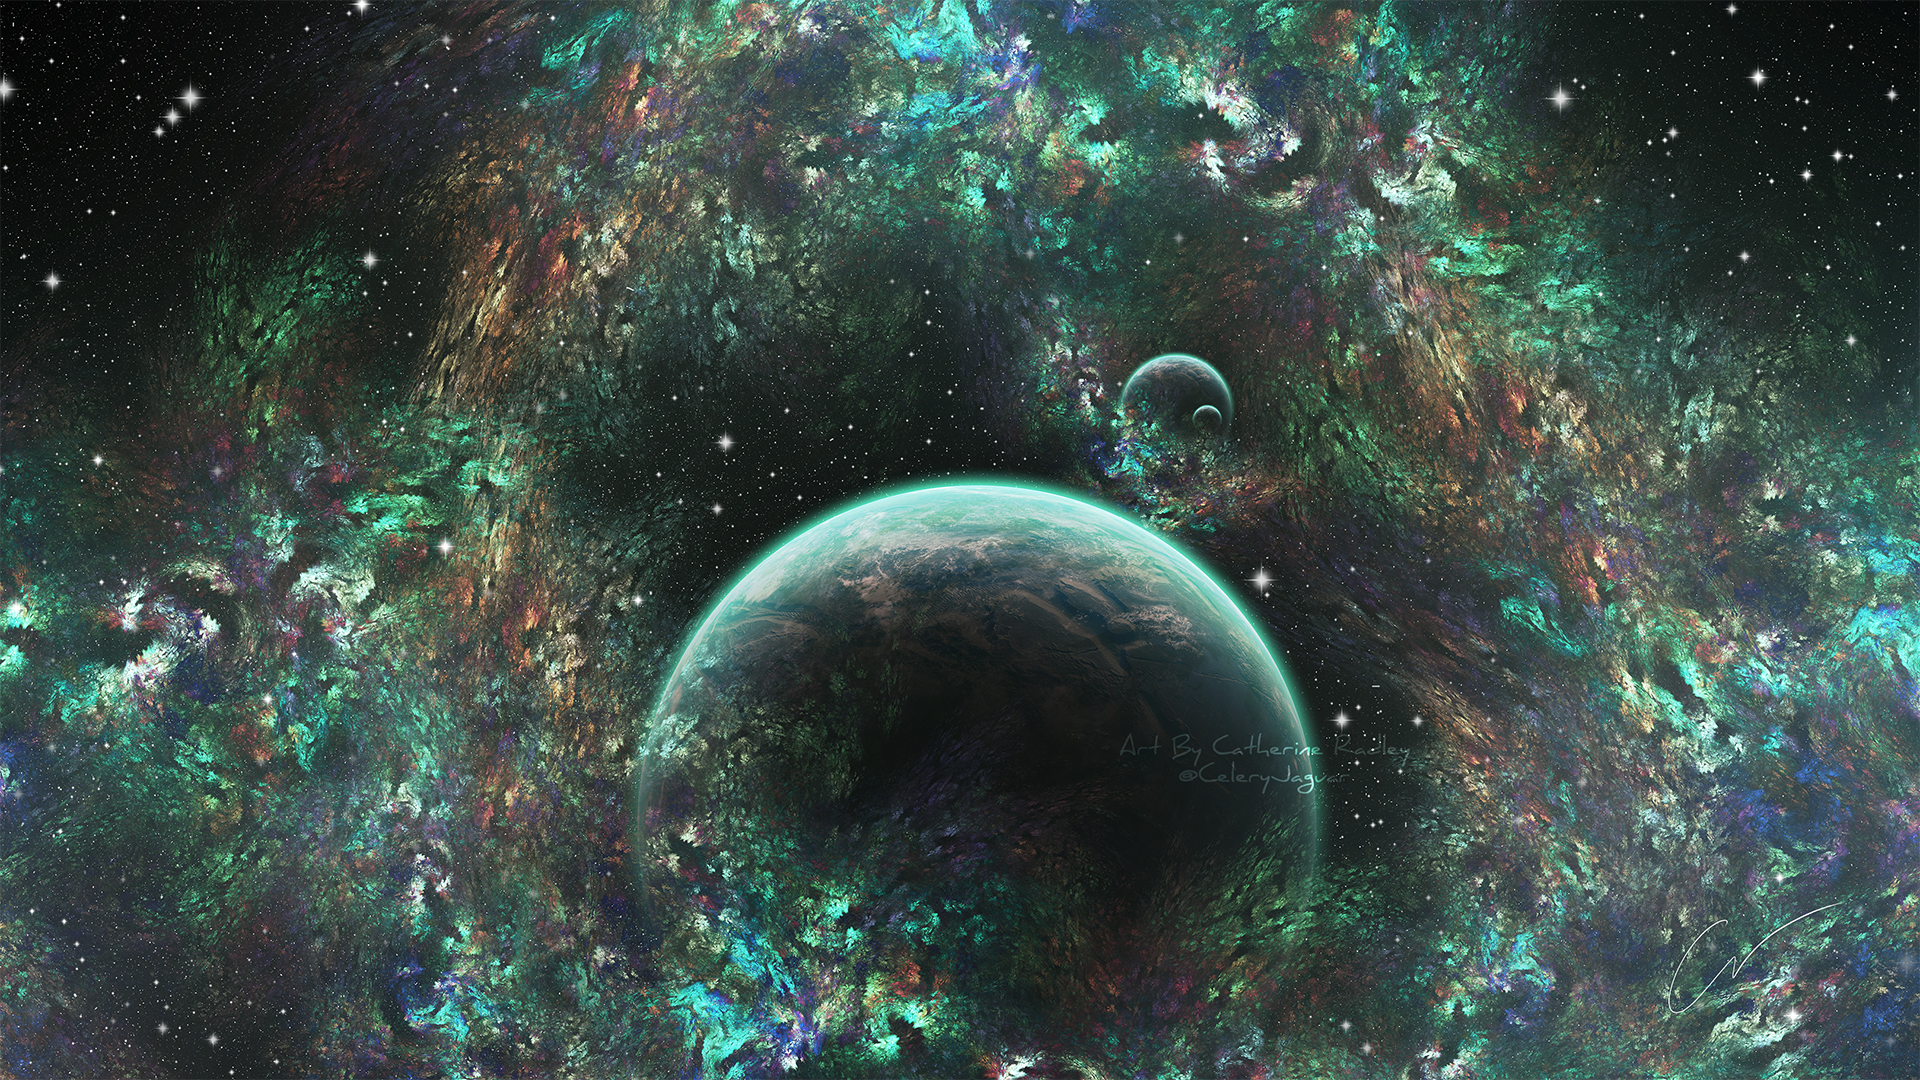 Planet in Glowing and Colorful Space by Catherine Radley